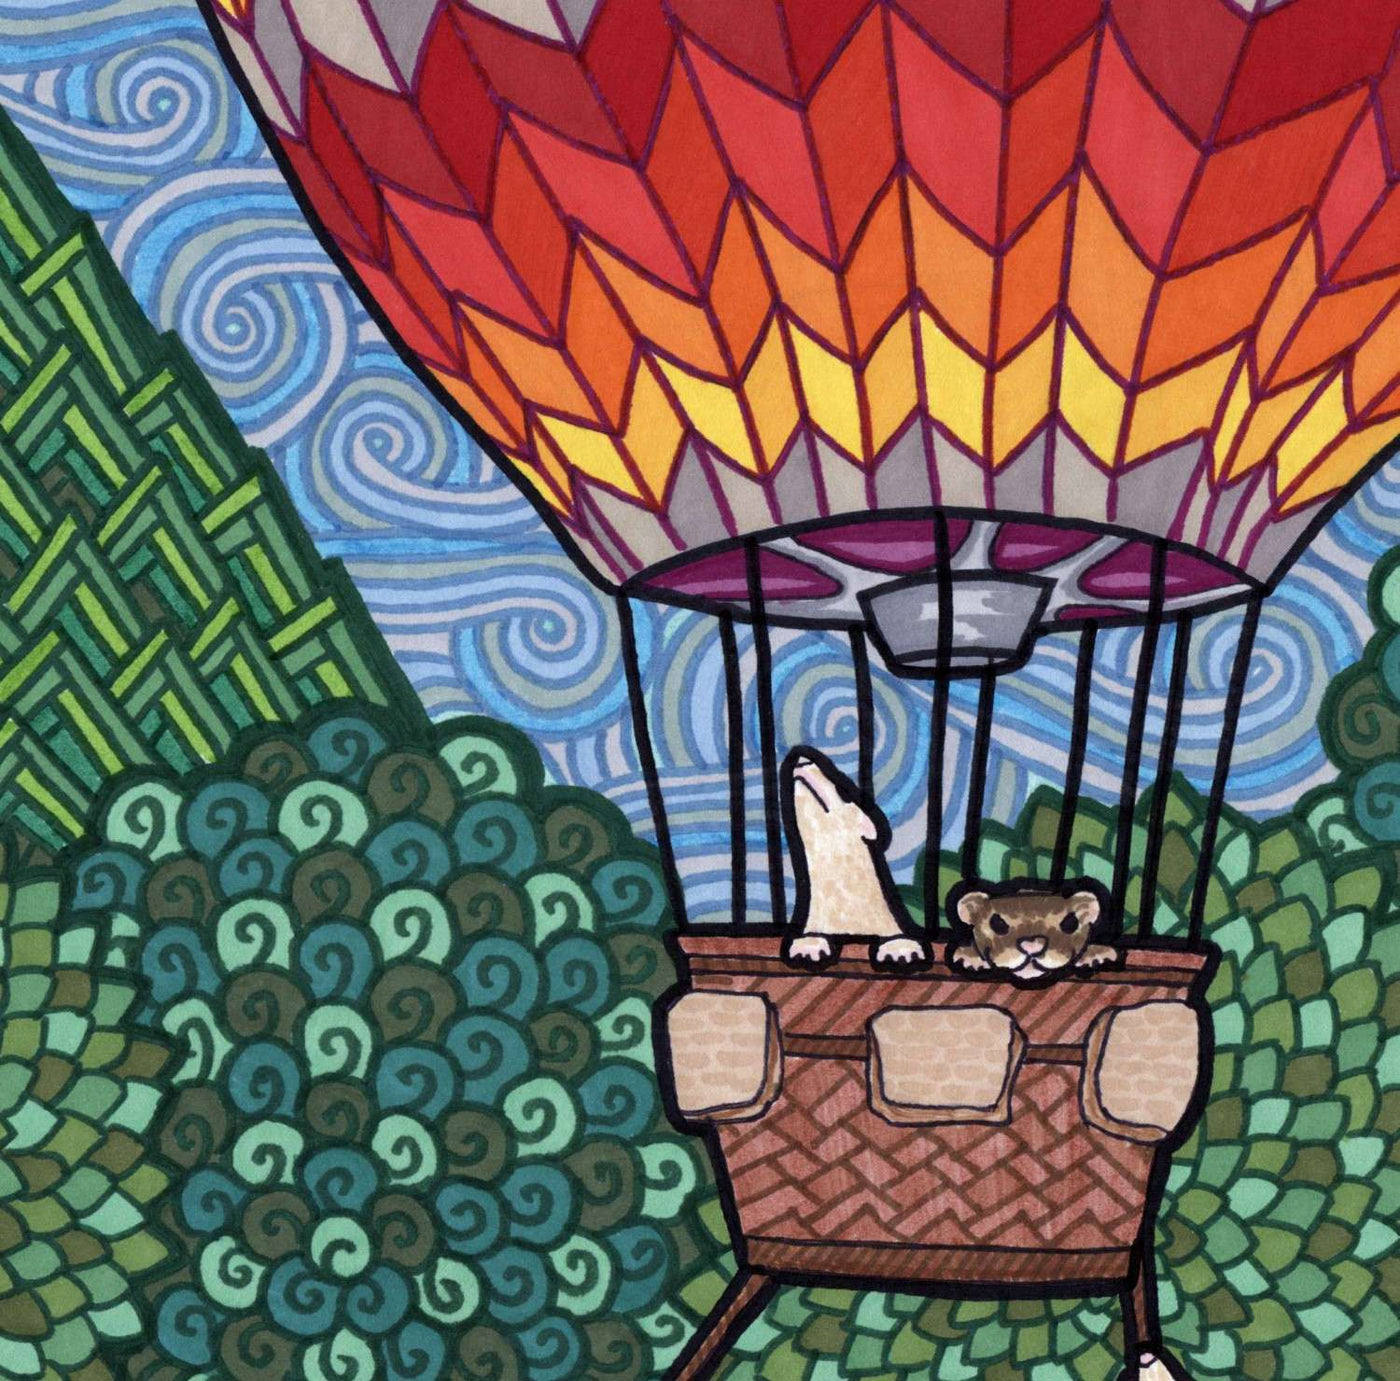 Close-up illustration of ferrets in a hot air balloon basket with vibrant patterns in an imaginative setting.